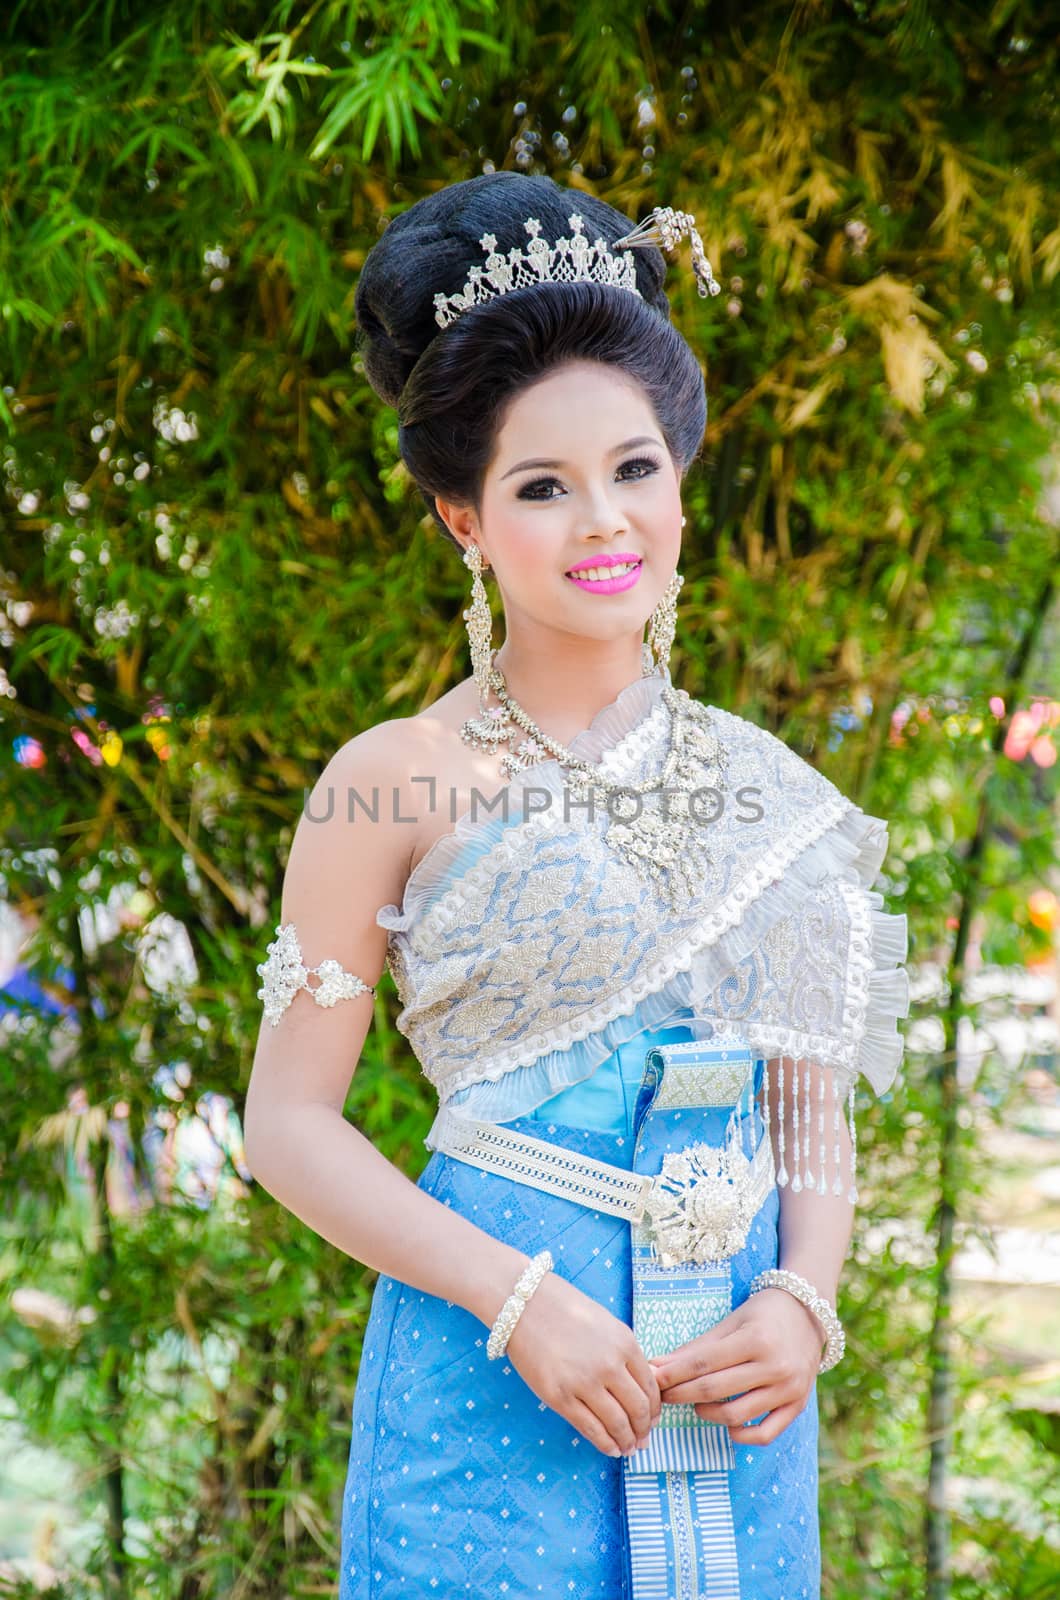 LOPBURI - APRIL 13: Unidentified model in period dress on Songkran Festival is celebrated in Thailand as the traditional New Year's at Banmi district on April 13, 2015 in Lopburi, Thailand